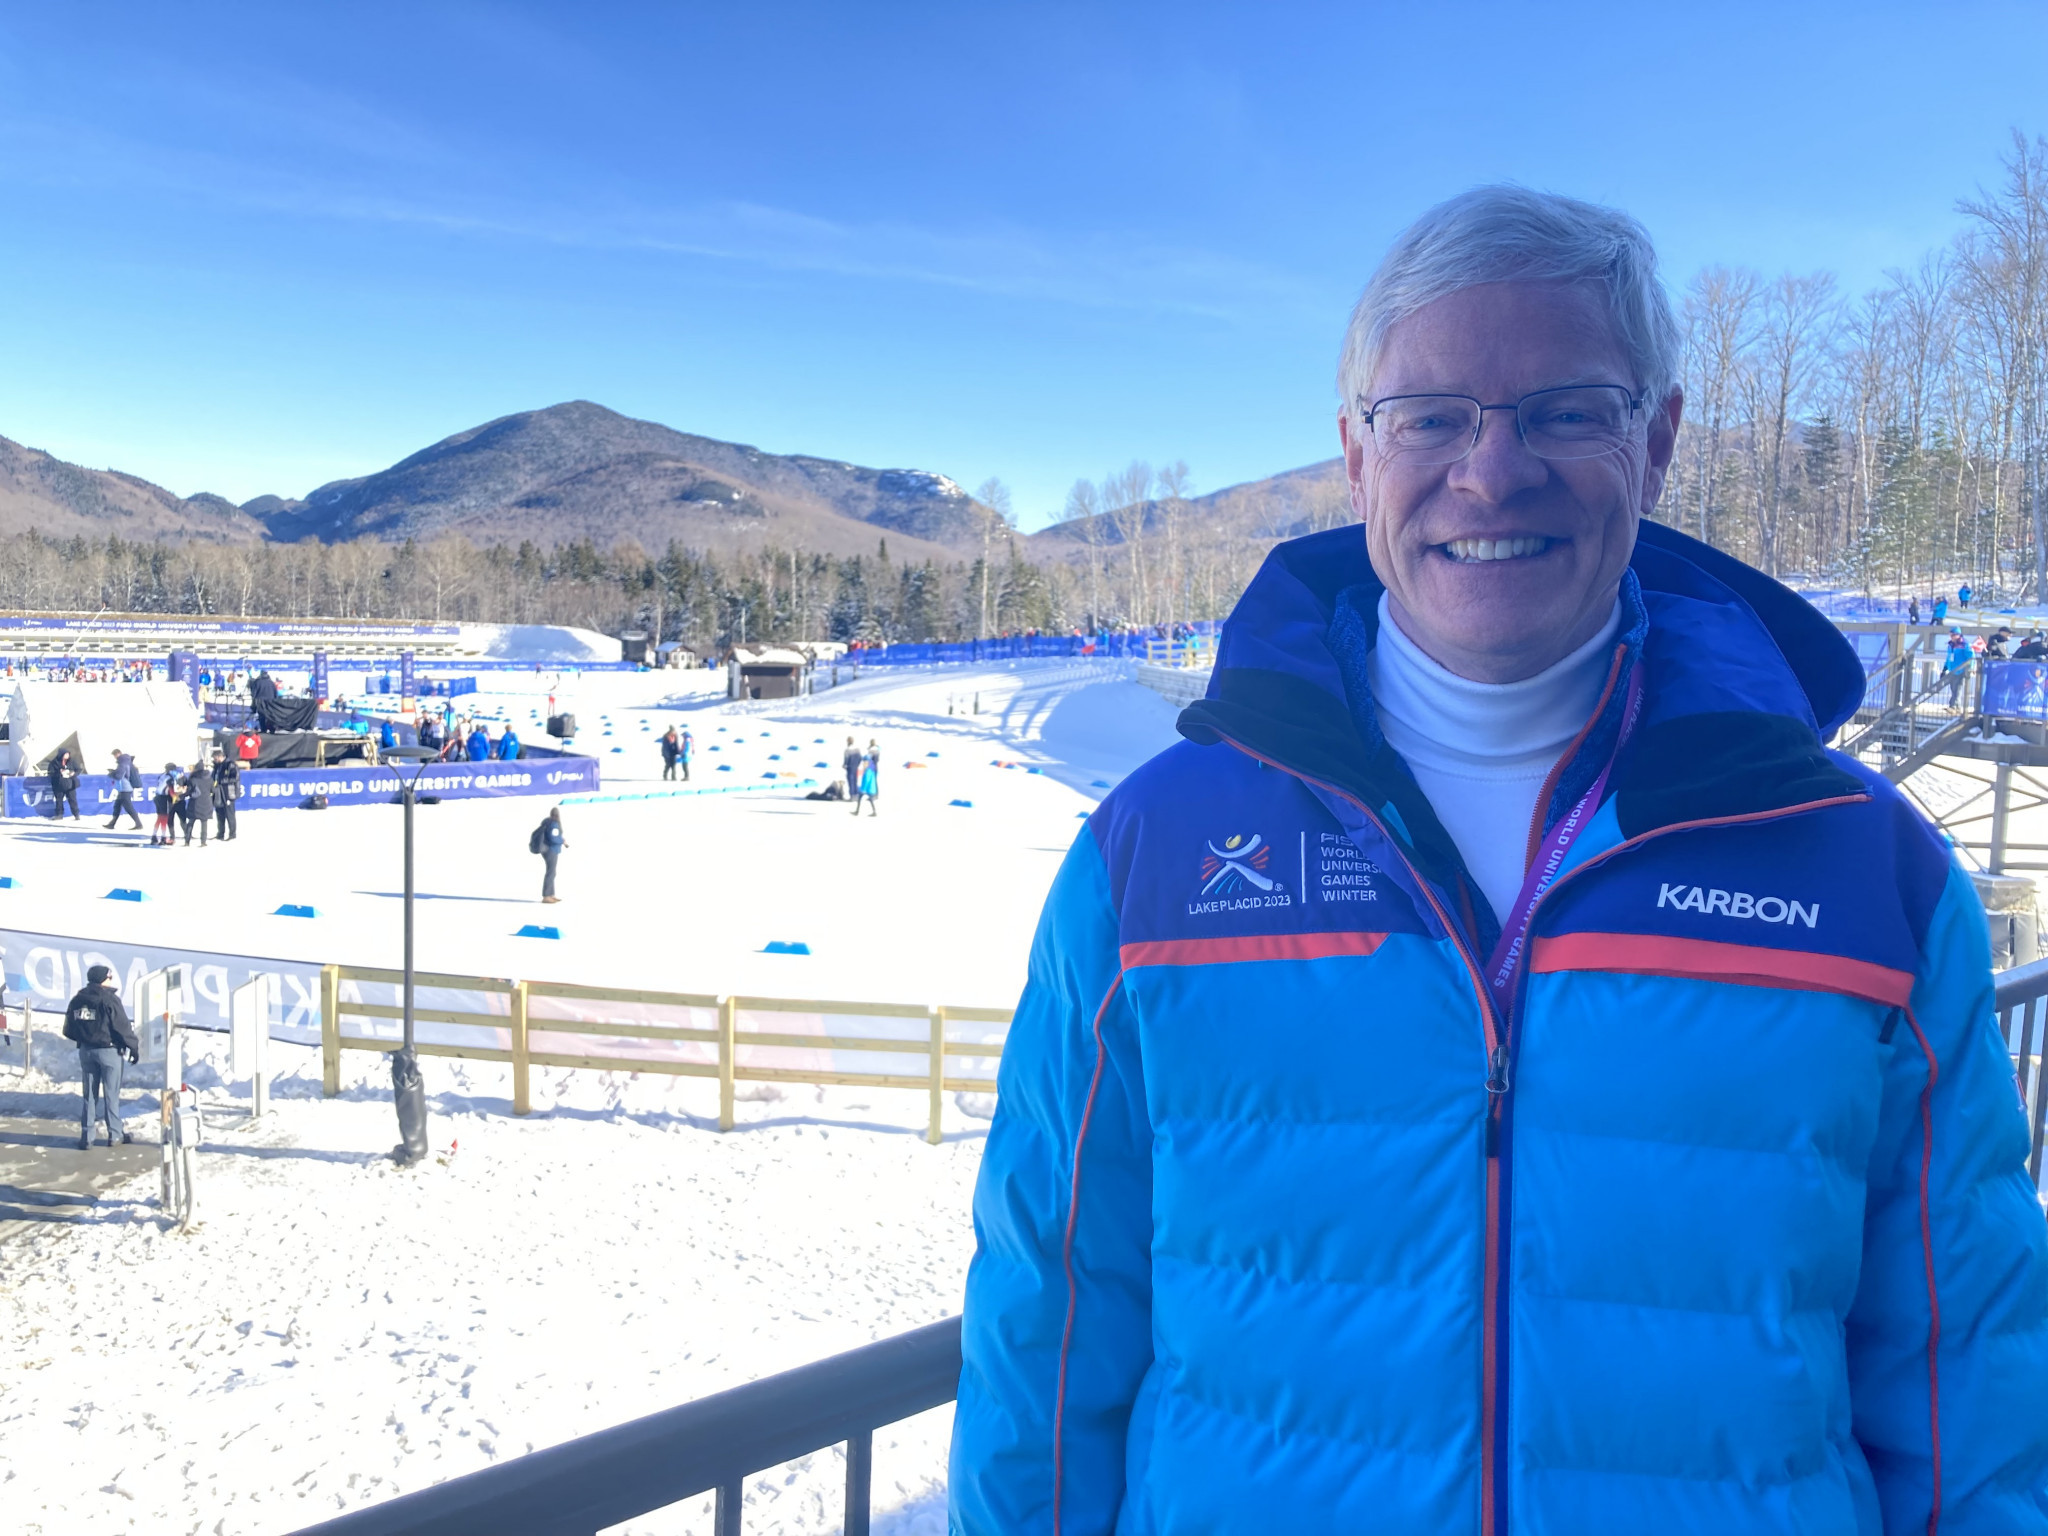 Exclusive: Lake Placid in talks over possible Winter Youth Olympic bid, says Mayor